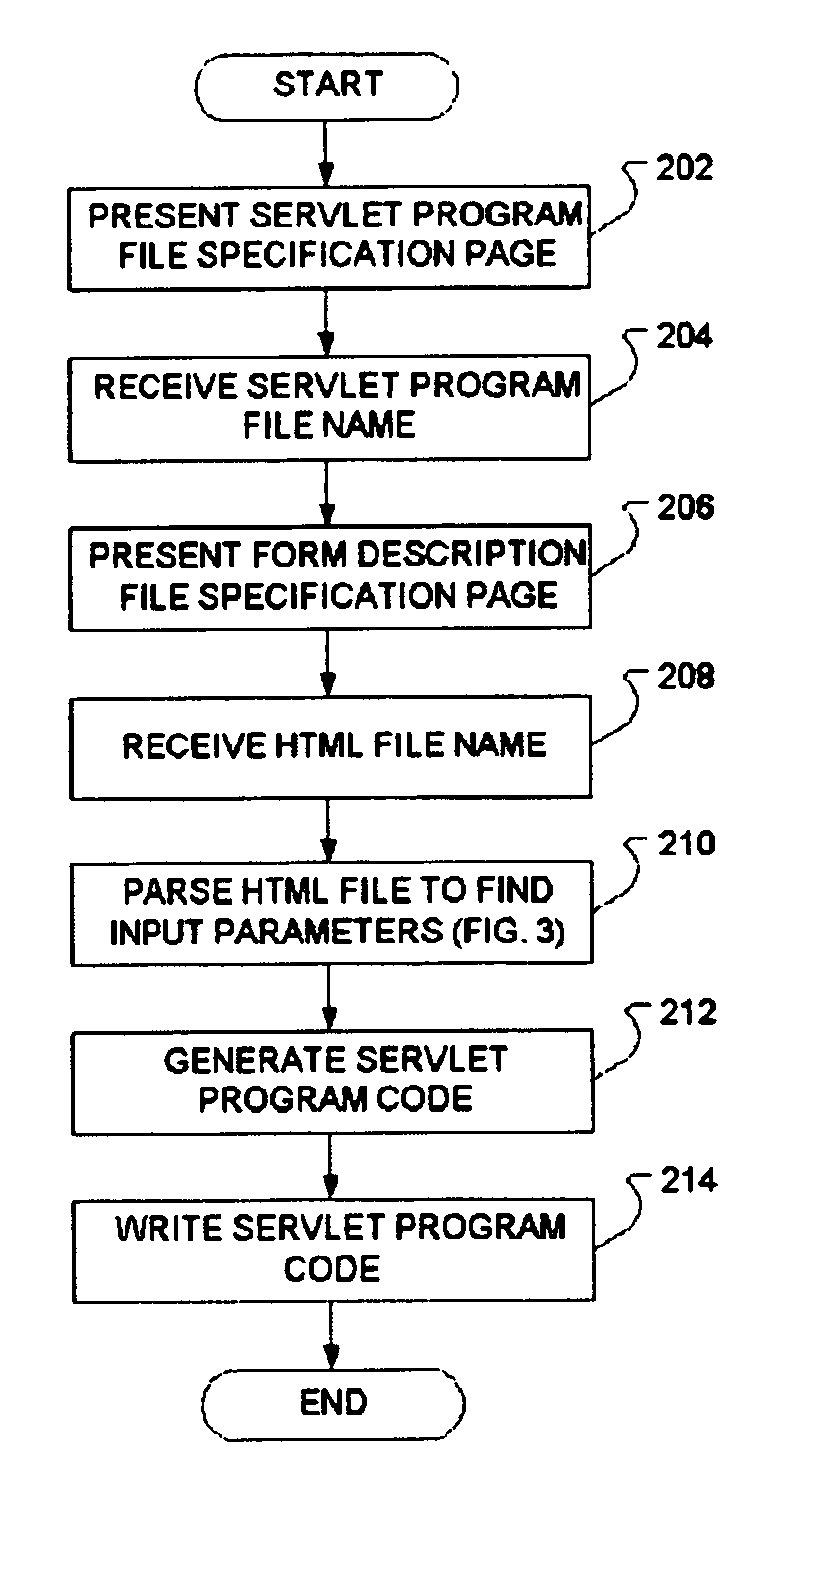 Method to reduce input parameter interface error and inconsistency for servlets